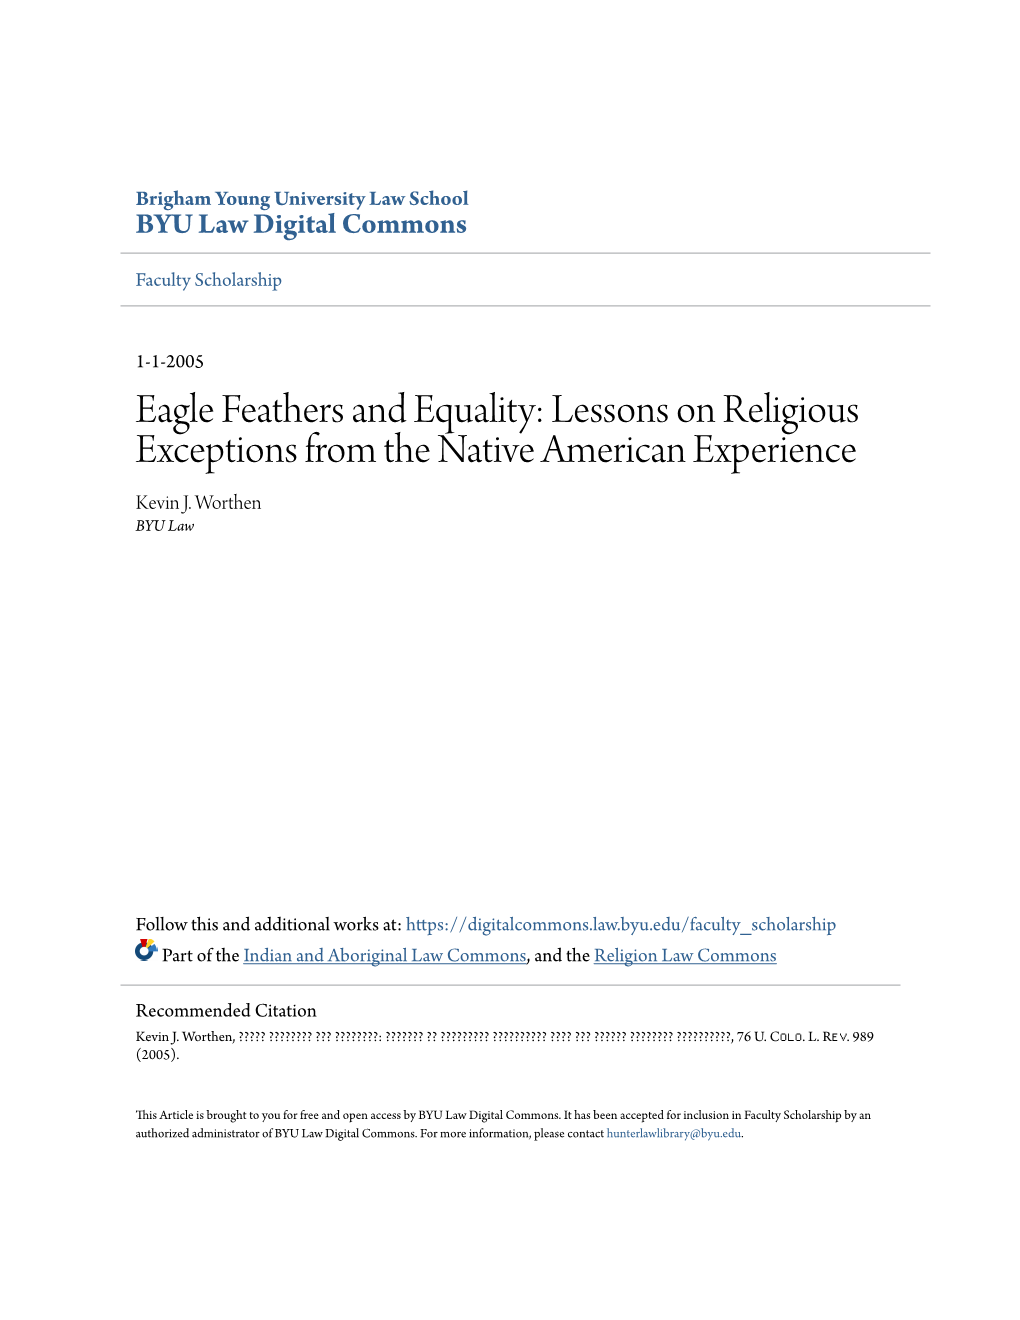 Eagle Feathers and Equality: Lessons on Religious Exceptions from the Native American Experience Kevin J